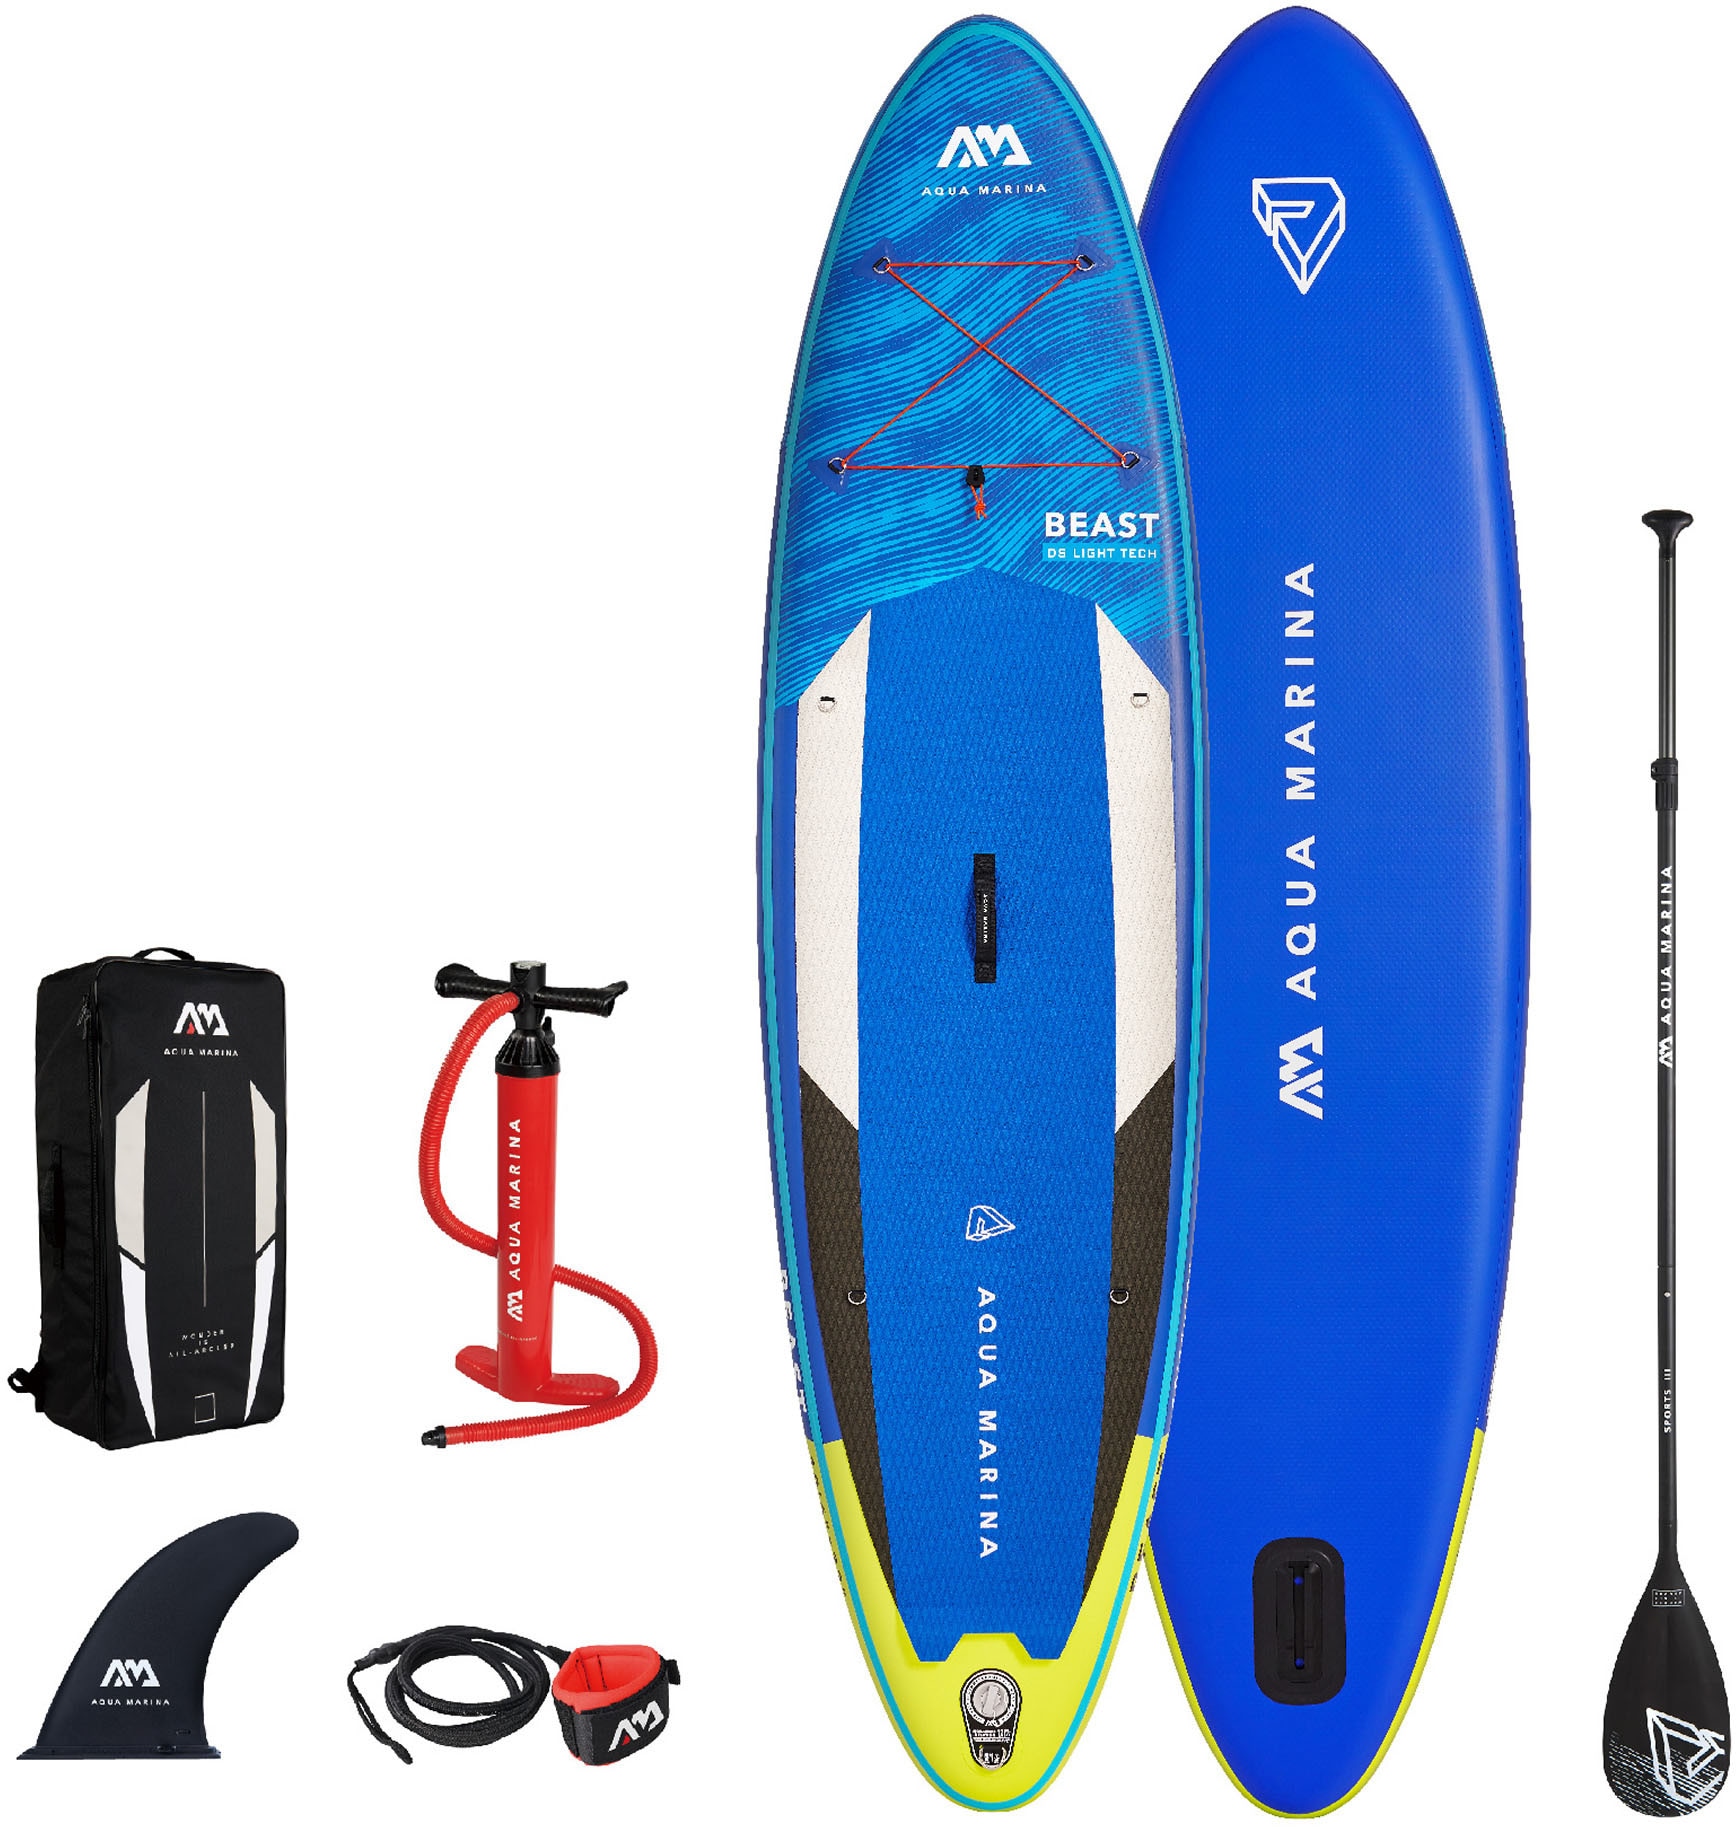 SUP-Boards online kaufen | Stand-Up Paddle jetzt bei